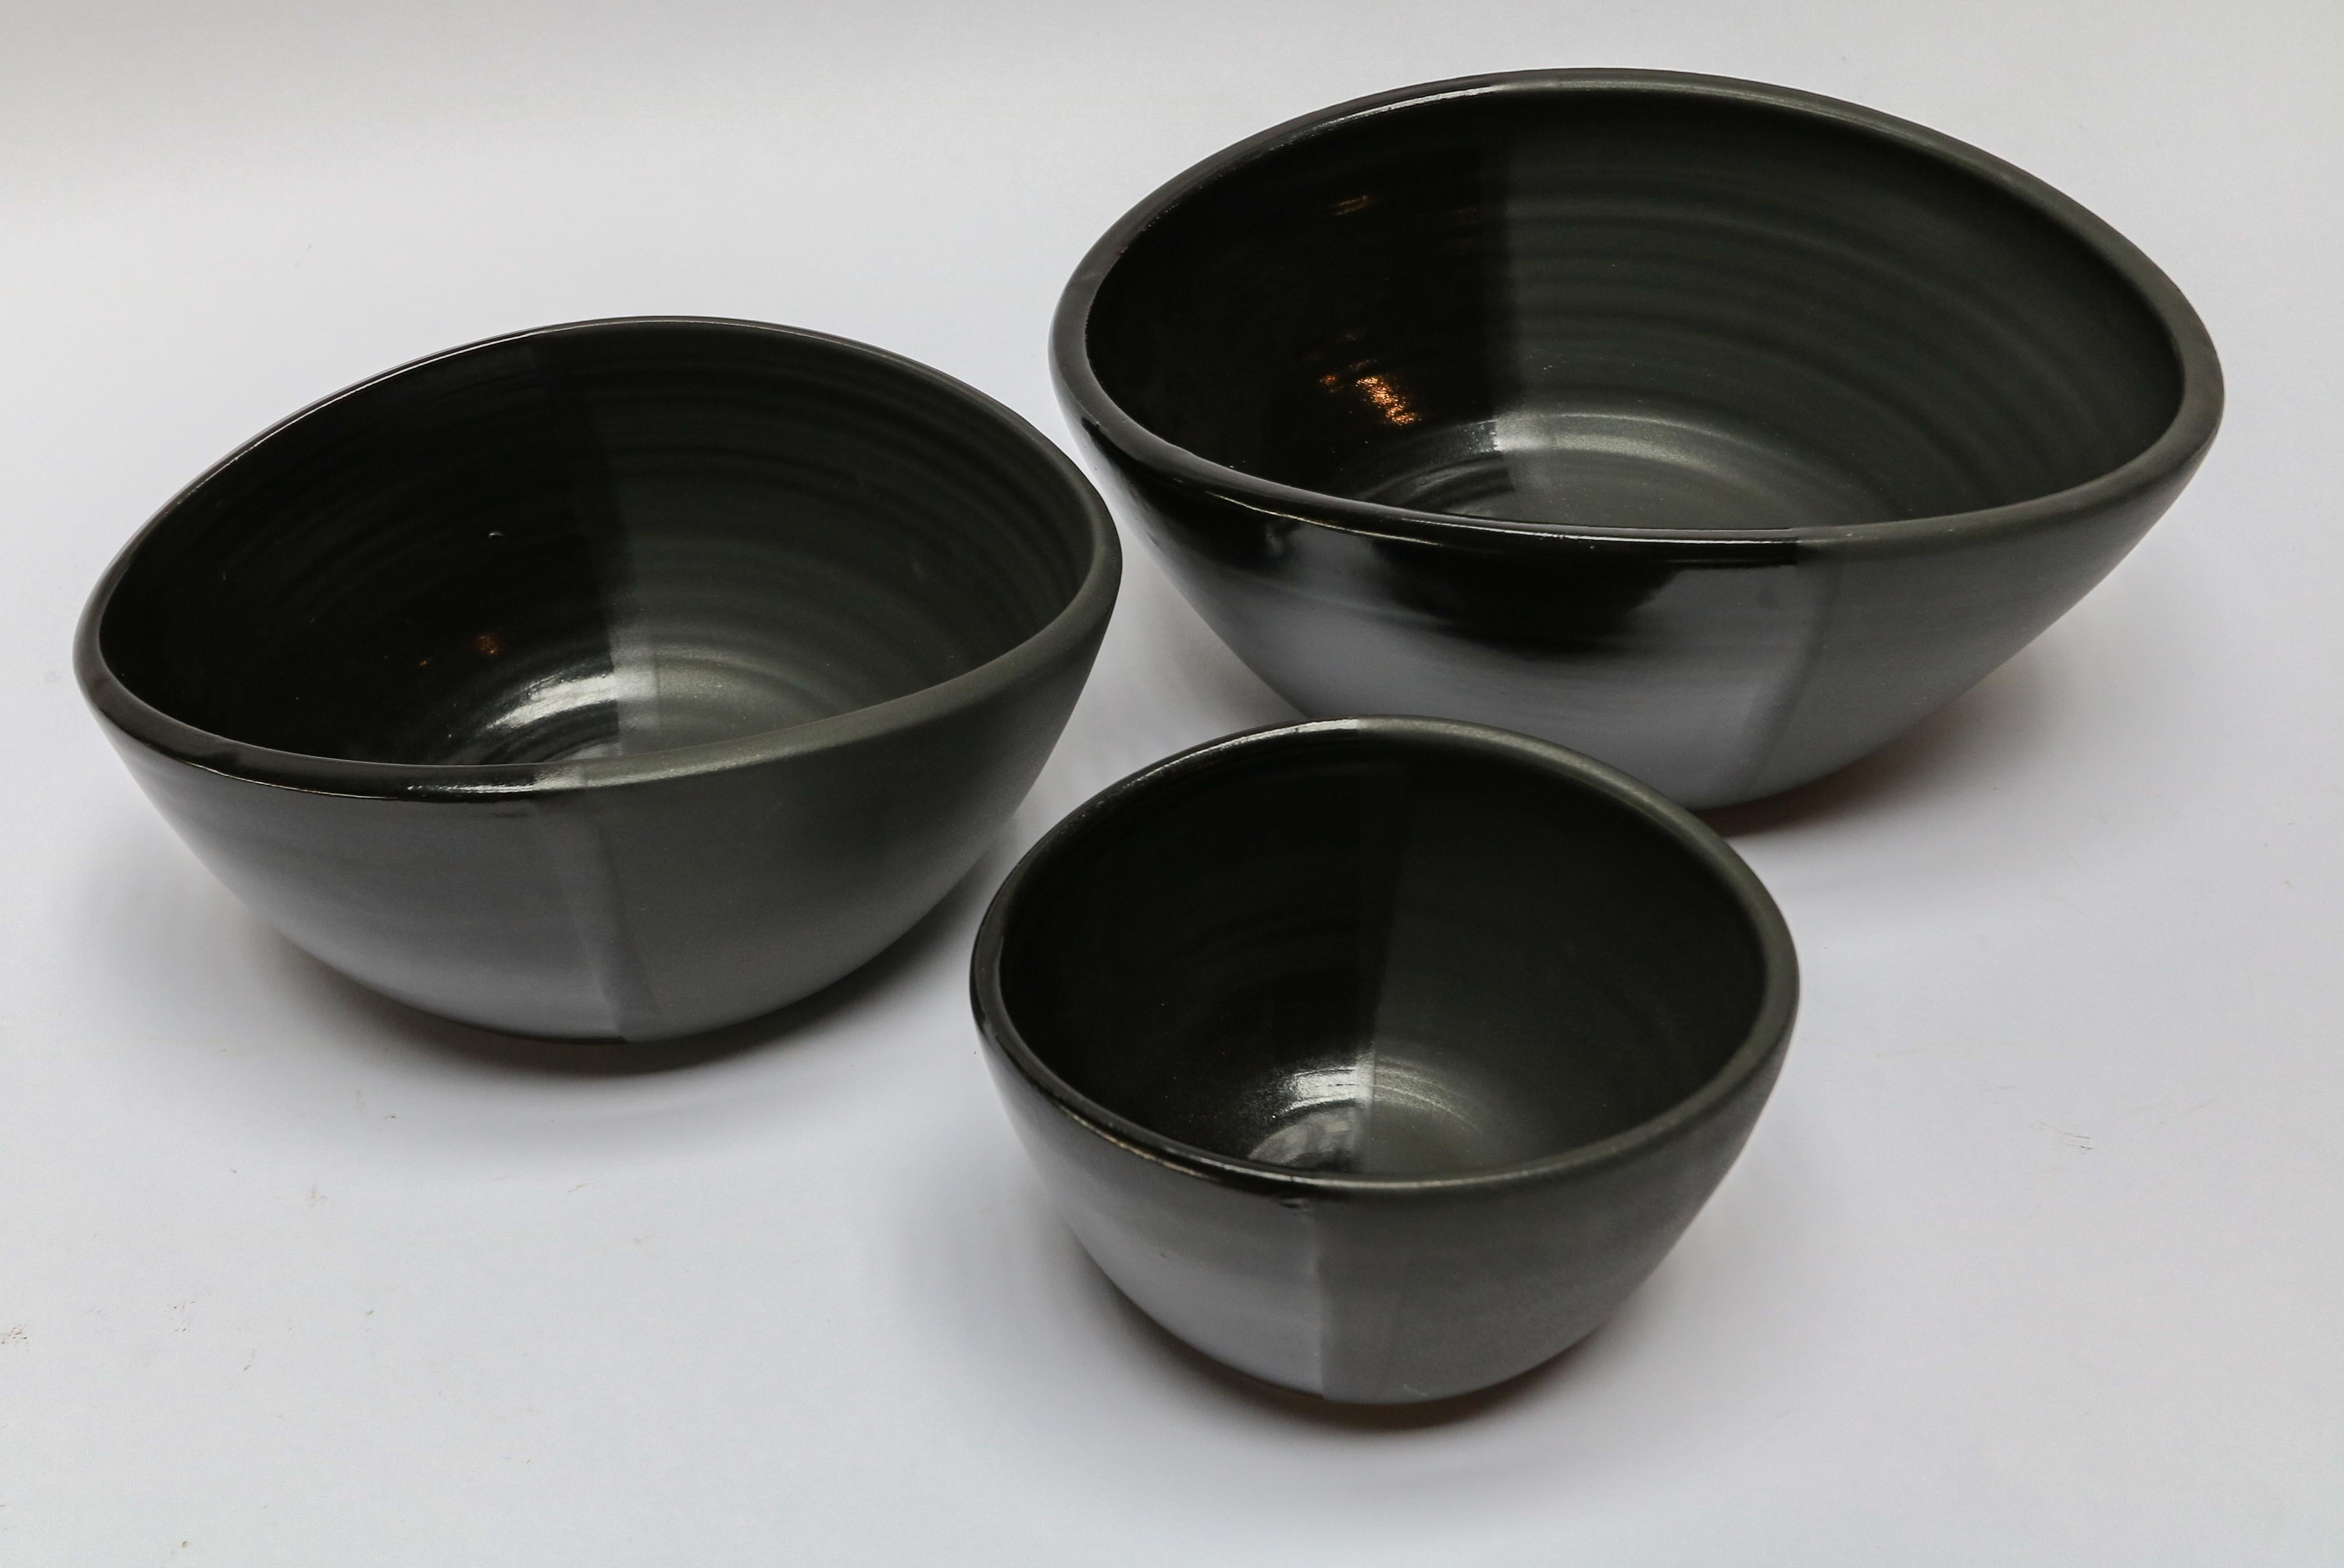 Handmade ceramic Derrick nesting bowls by Style Union Home in noir black. Also available in blanc white.

Small: 7? x 5.5? x 4? H
Medium: 10? x 9? x 4.5? H
Large: 13? x 10.5? x 4.75? H.